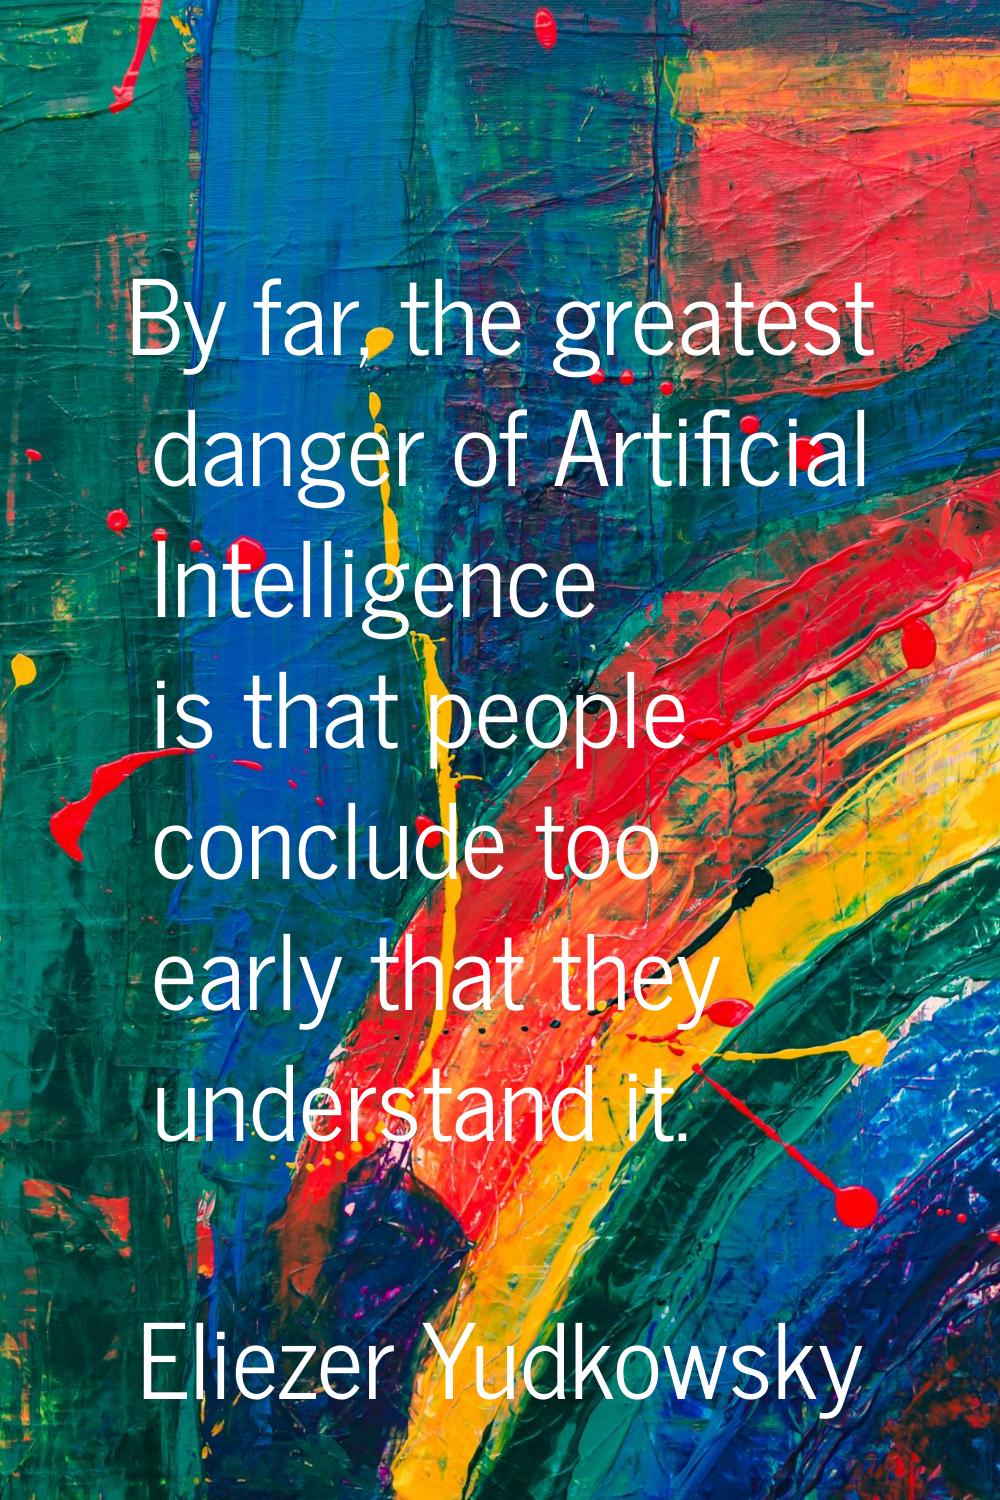 By far, the greatest danger of Artificial Intelligence is that people conclude too early that they 